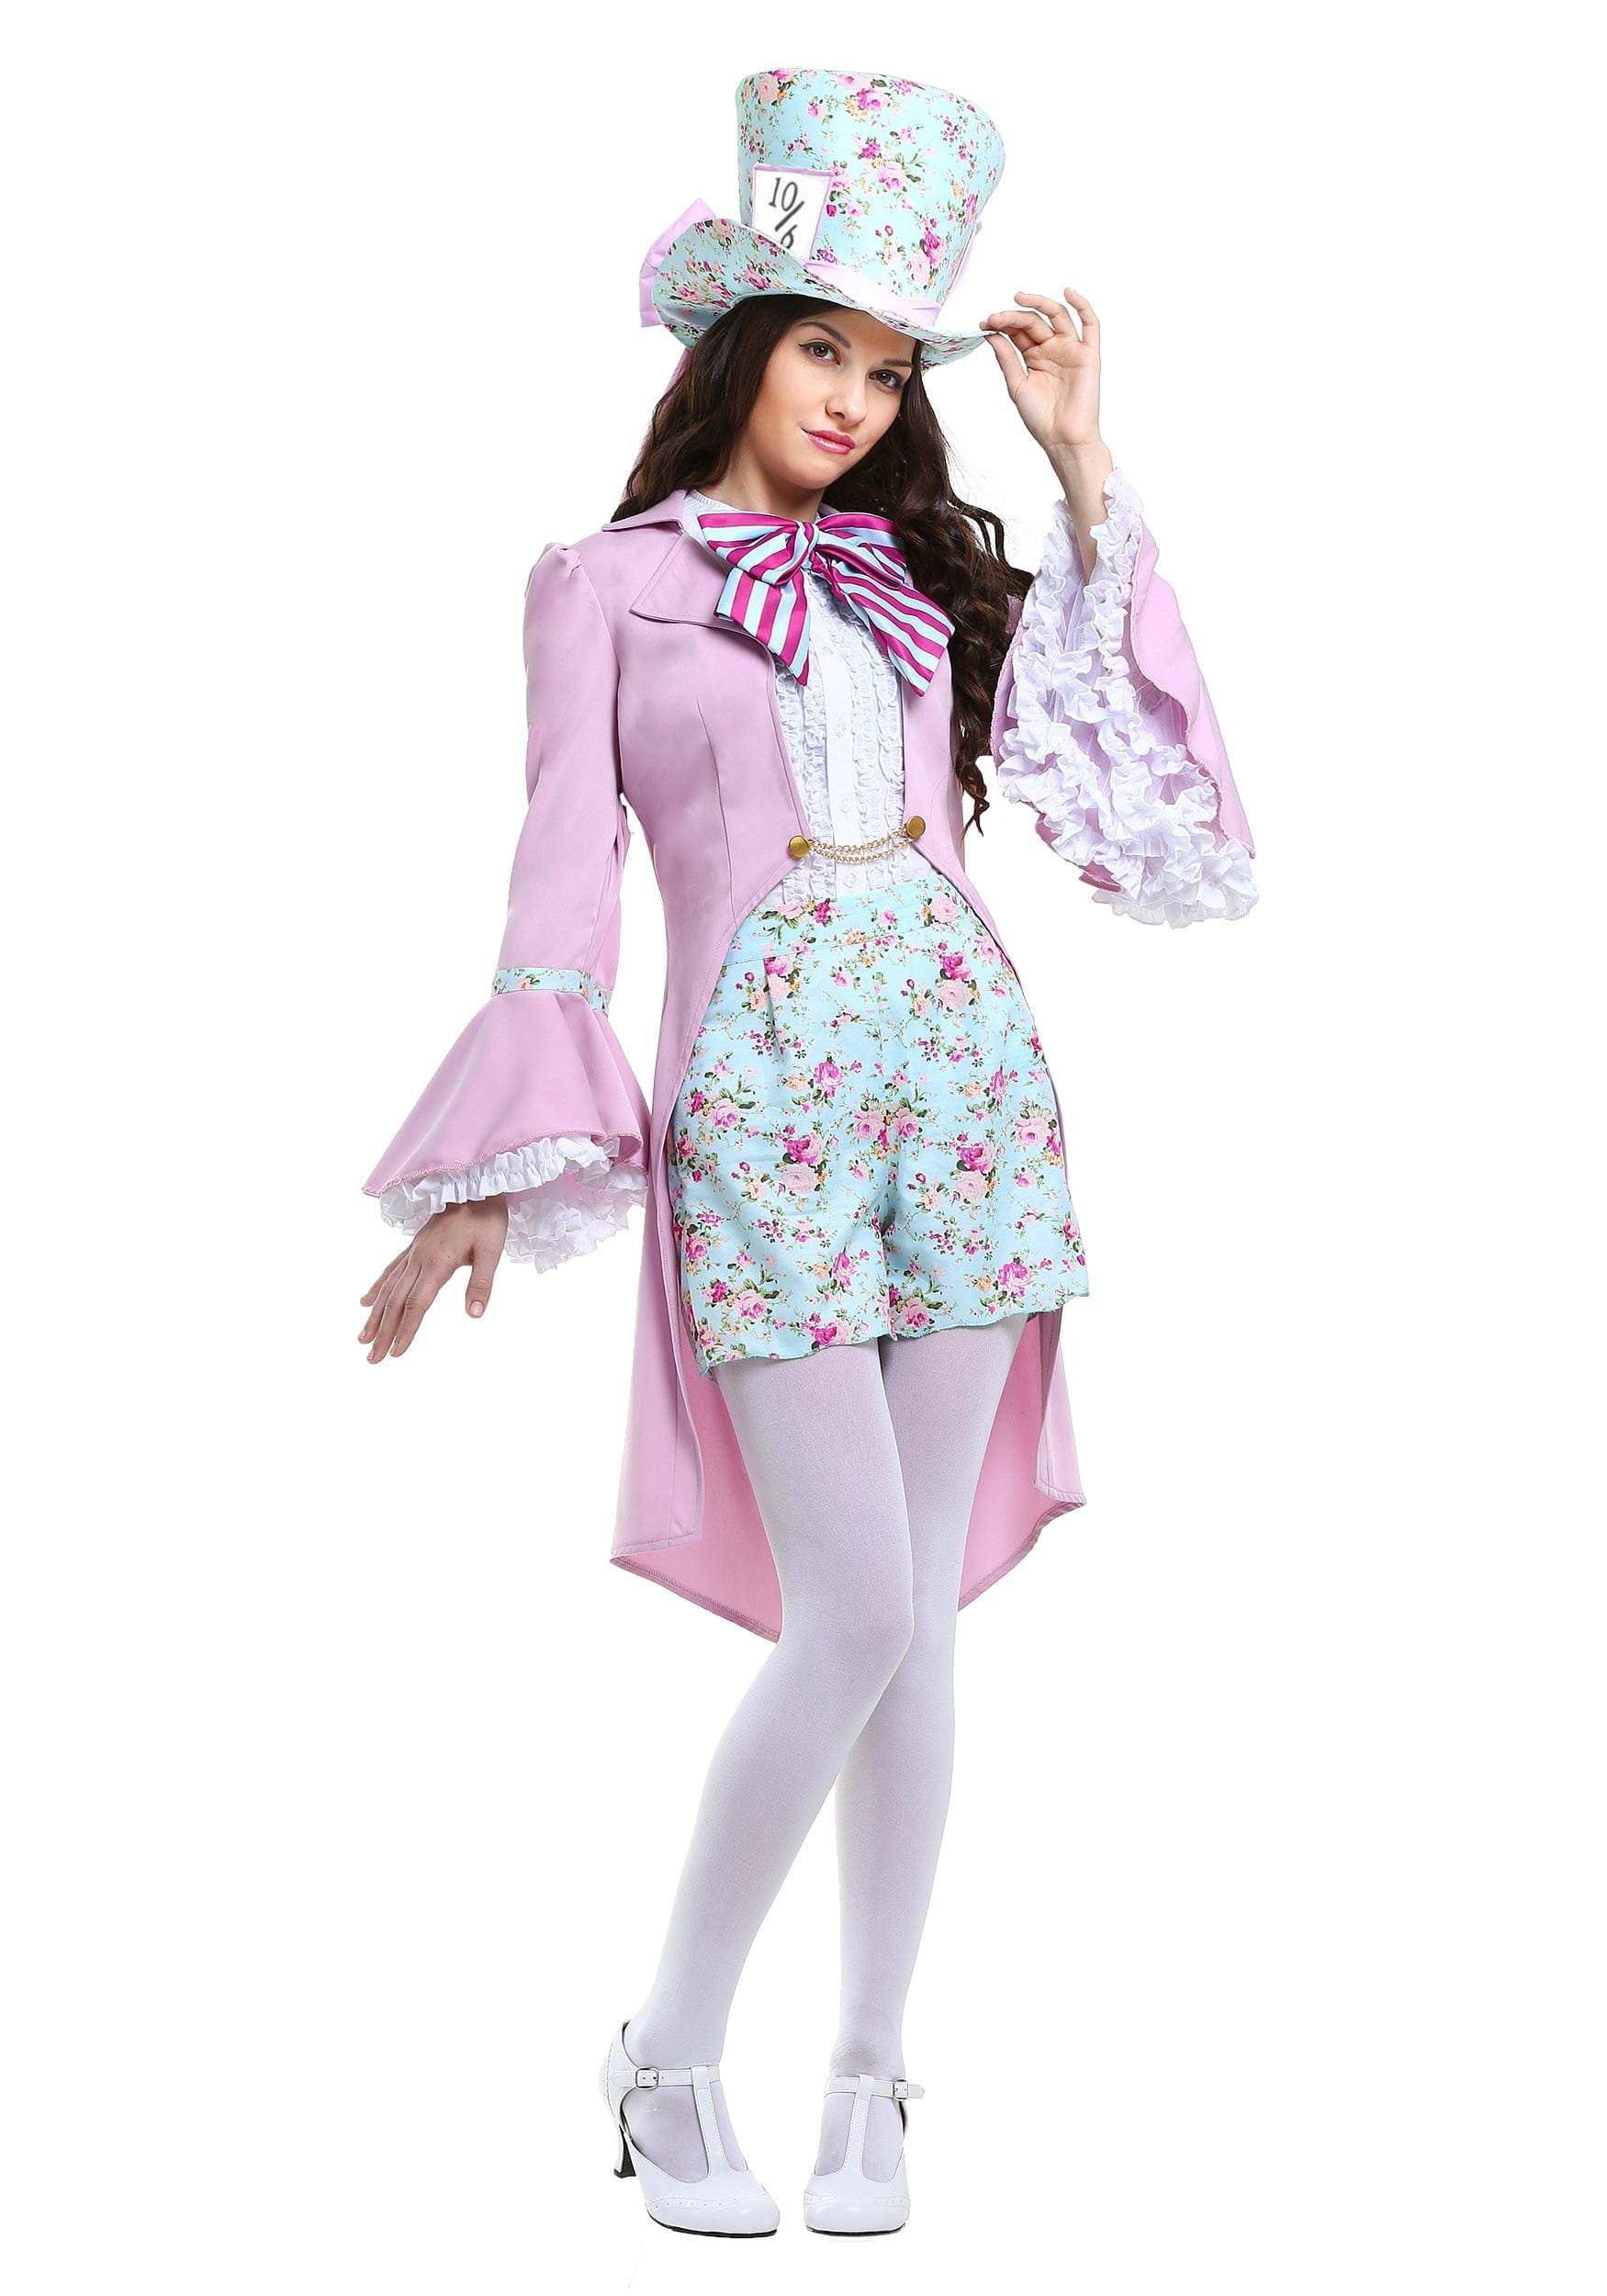 Image of Pretty Mad Hatter Costume for Women ID FUN0241AD-XS